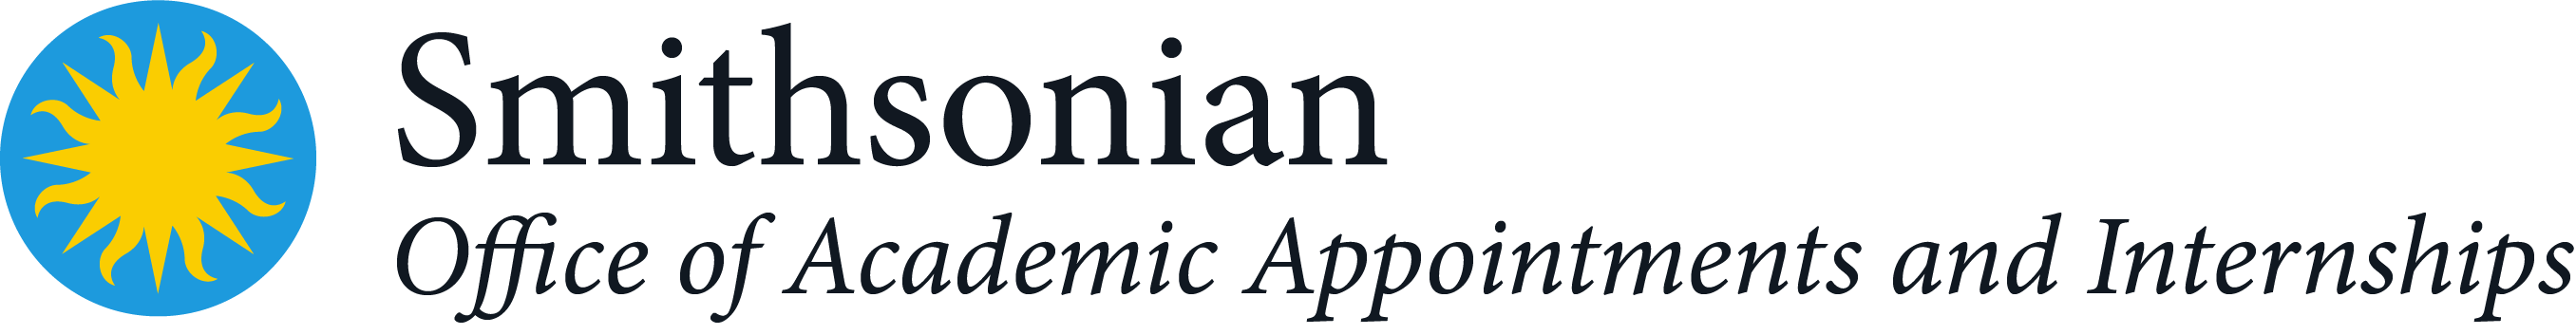 Office of Academic Appointments and Internships logo